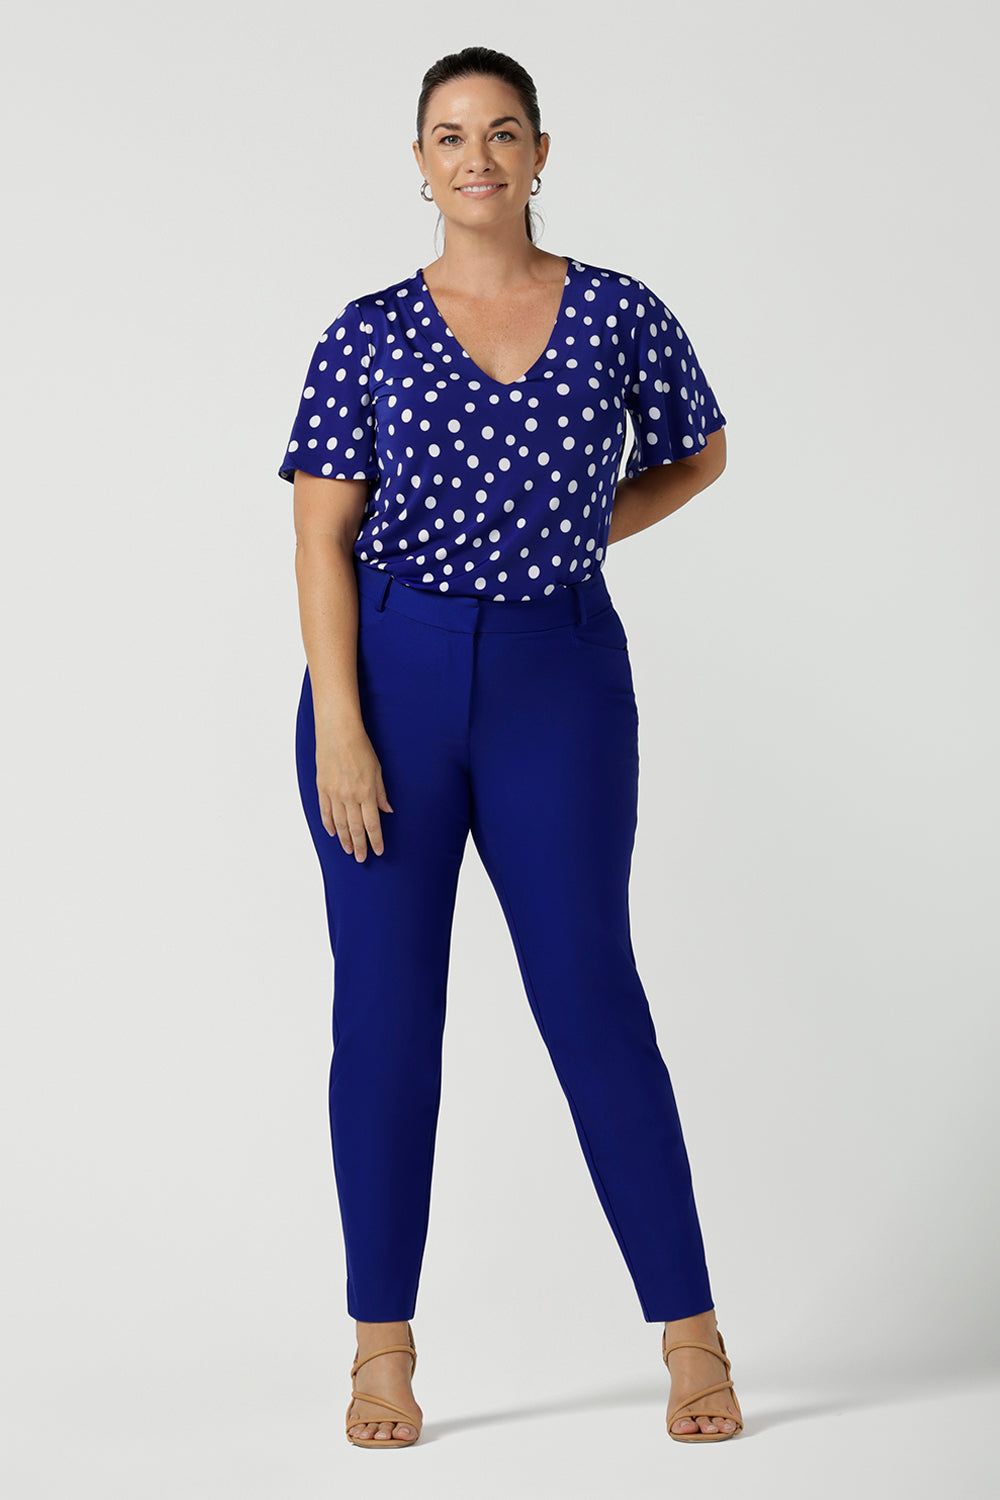 Lila top in Cobalt Spot on a happy size 12 woman. Curved hemline and flutter sleeves. A abstract polka dot print. Made in Australia for women size 8 to 24.